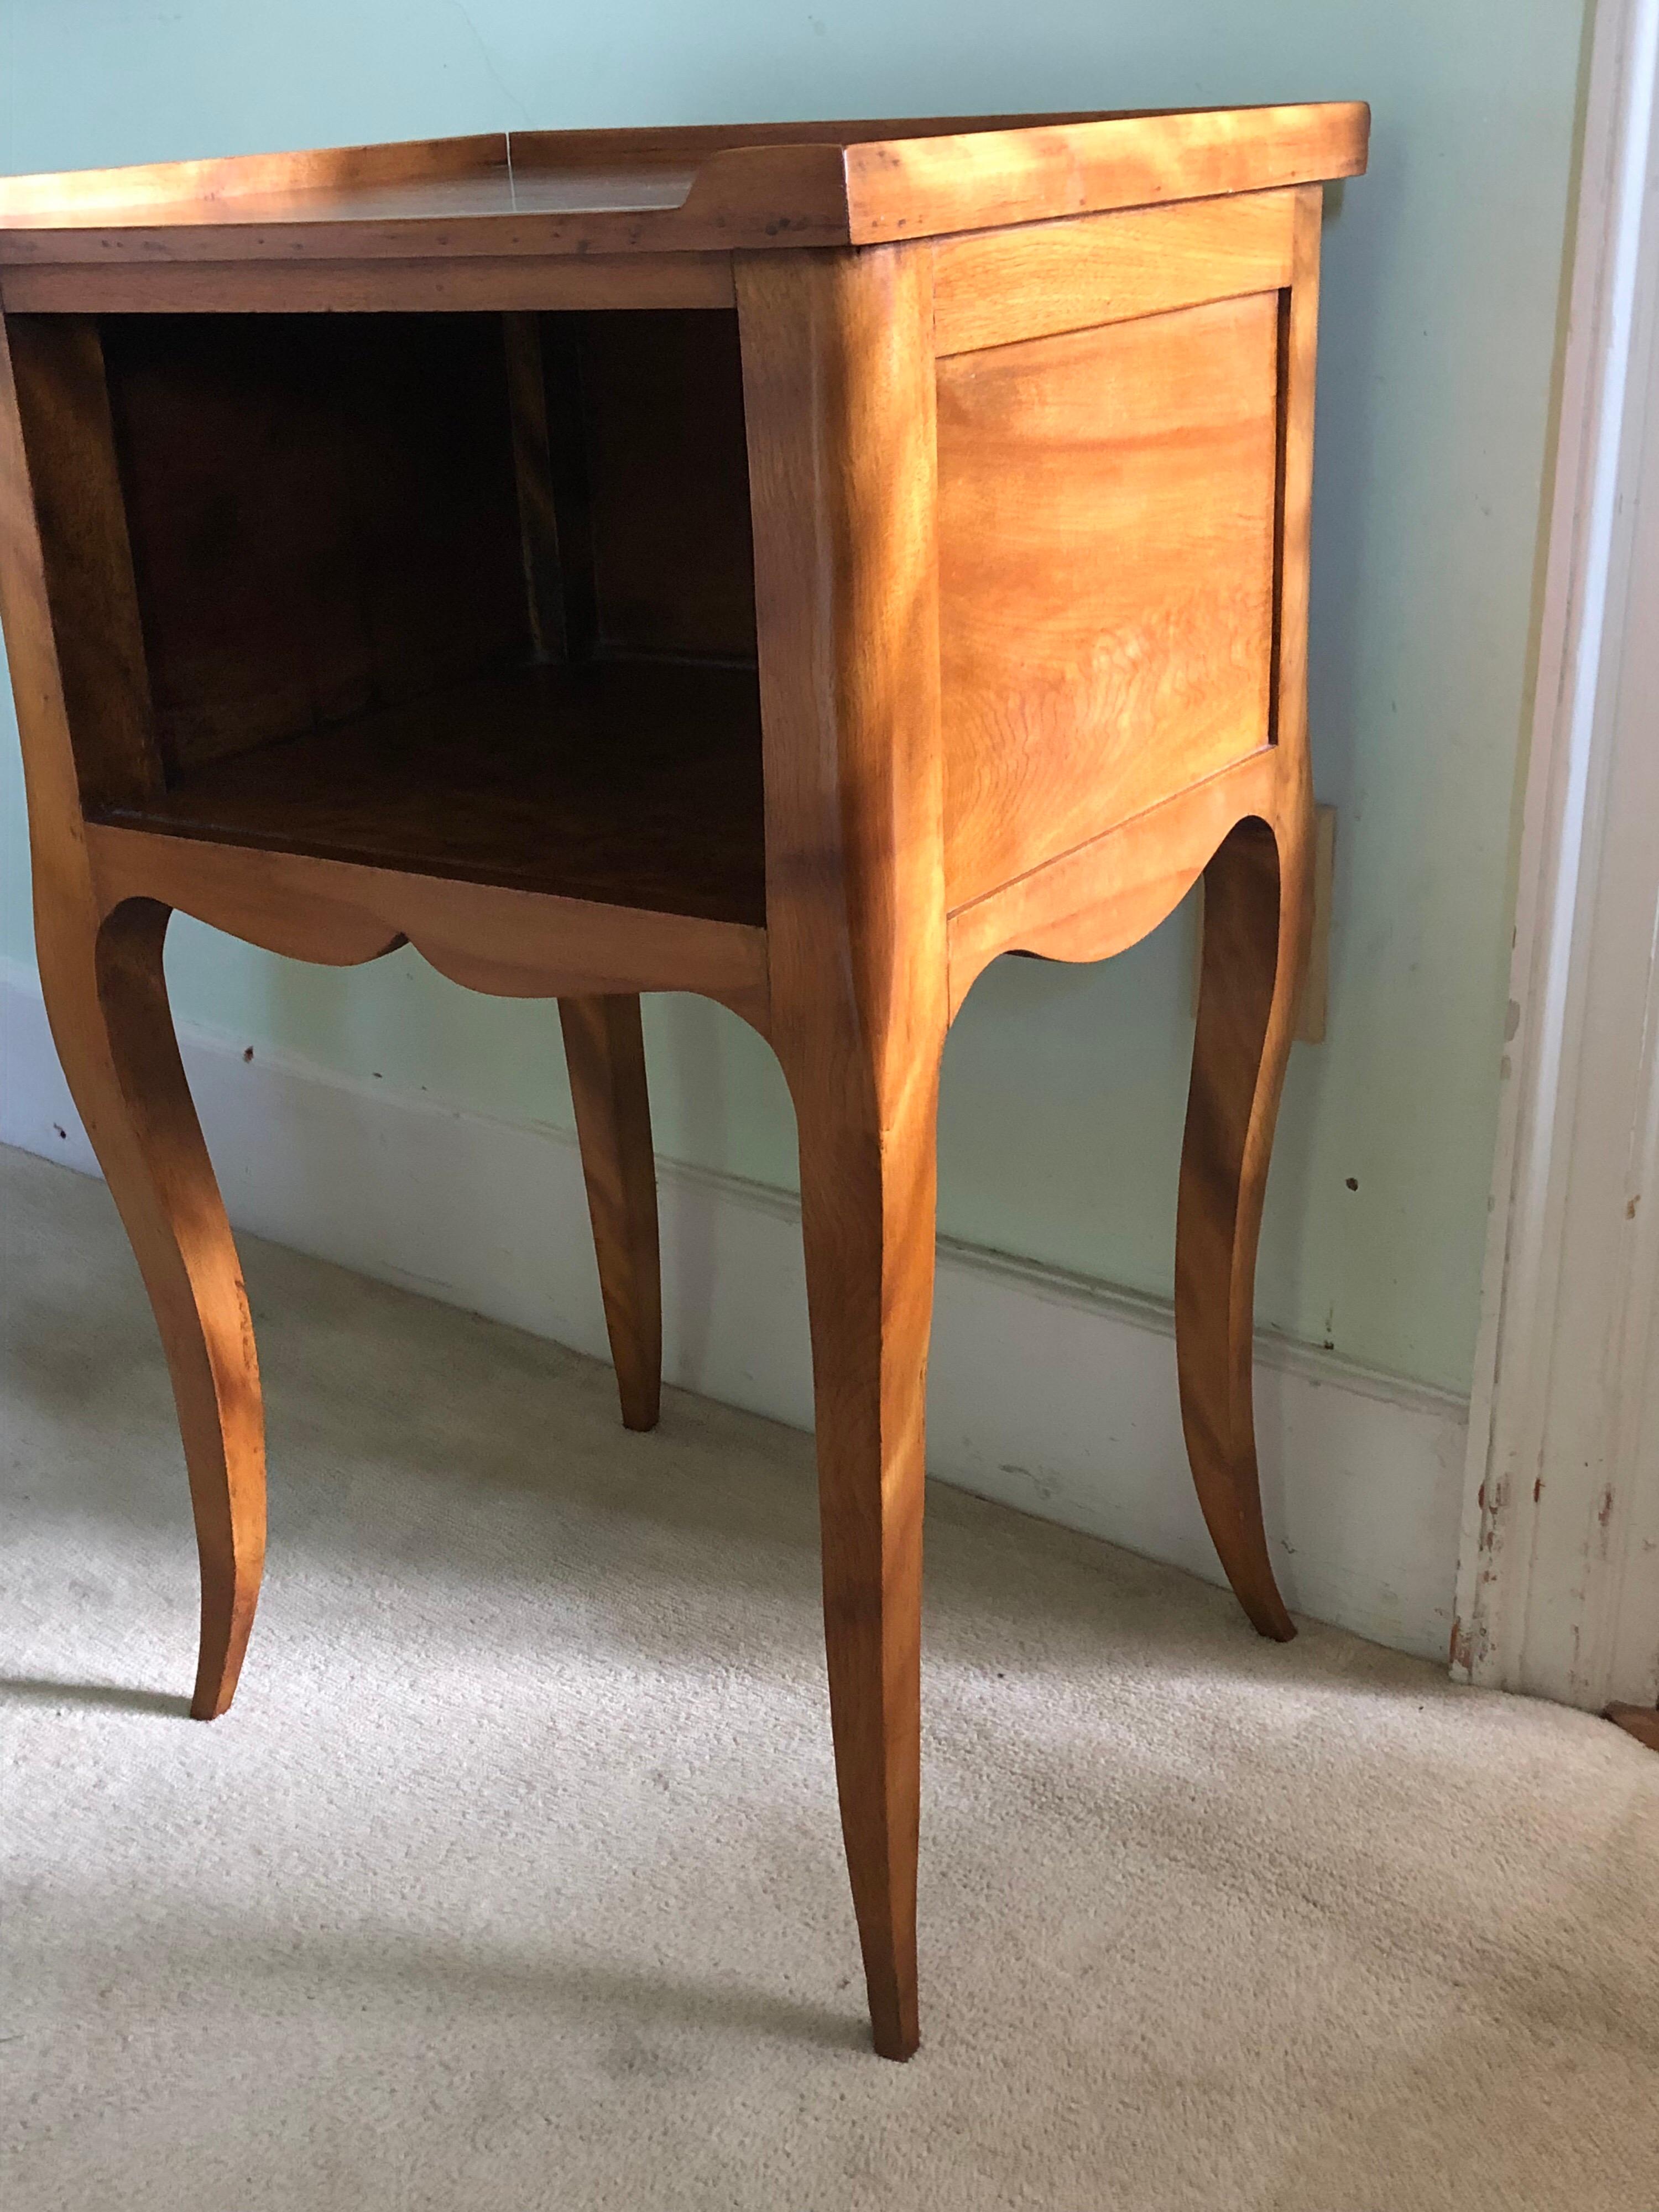 Late 19th -early 20th century Louis XV style table de chevet or nightstand. Graceful cabriolet legs and ample shelf for books and necessities. Light mahogany in color.